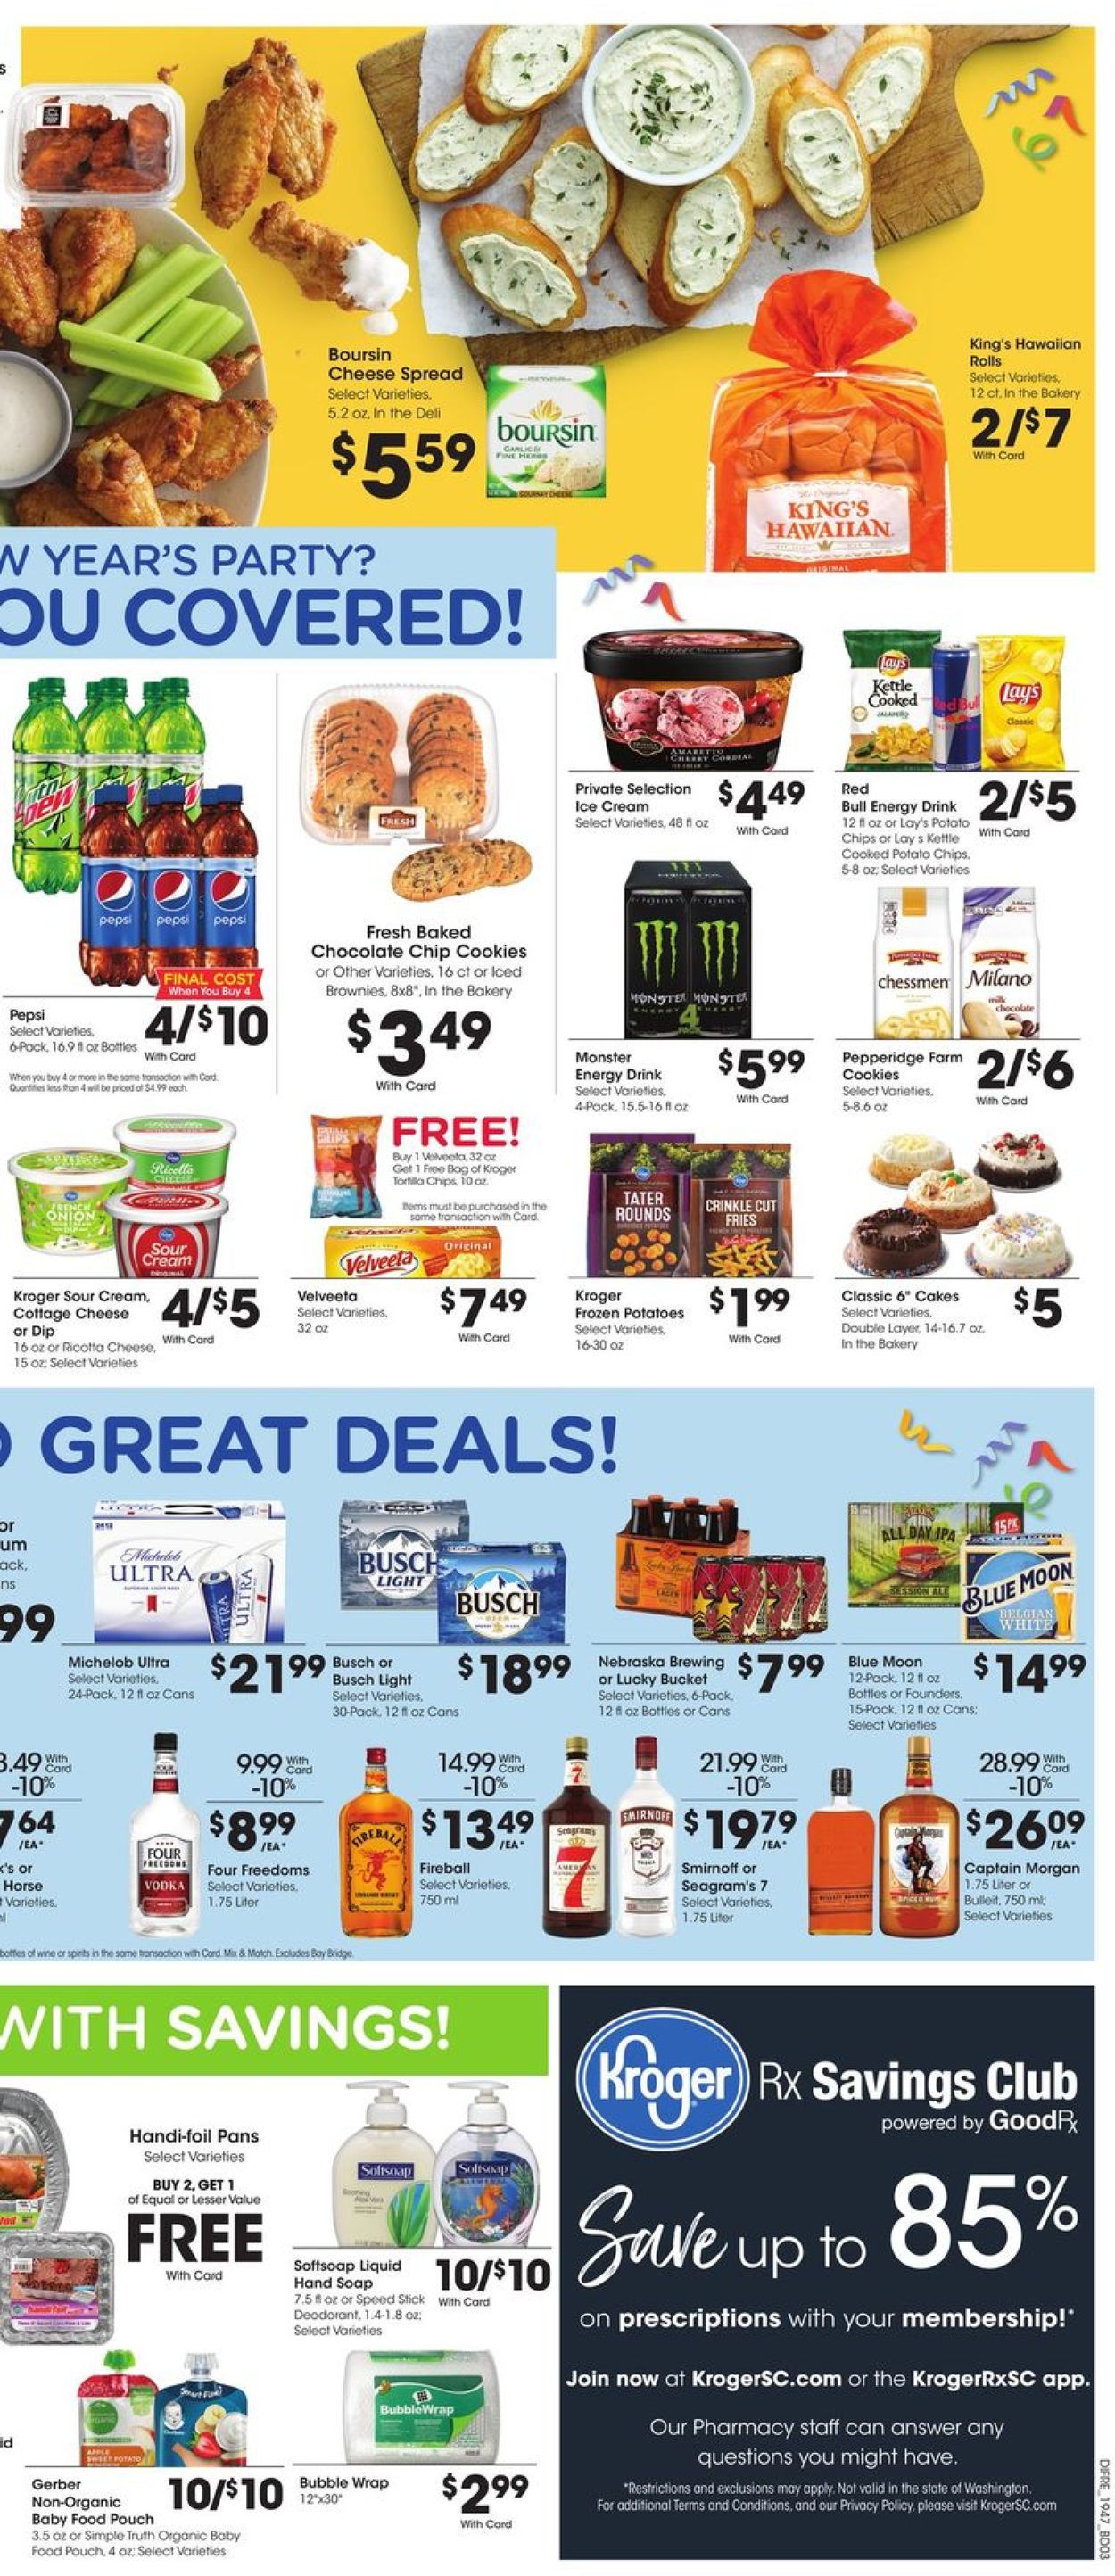 Catalogue Baker's - New Year's Ad 2019/2020 from 12/26/2019